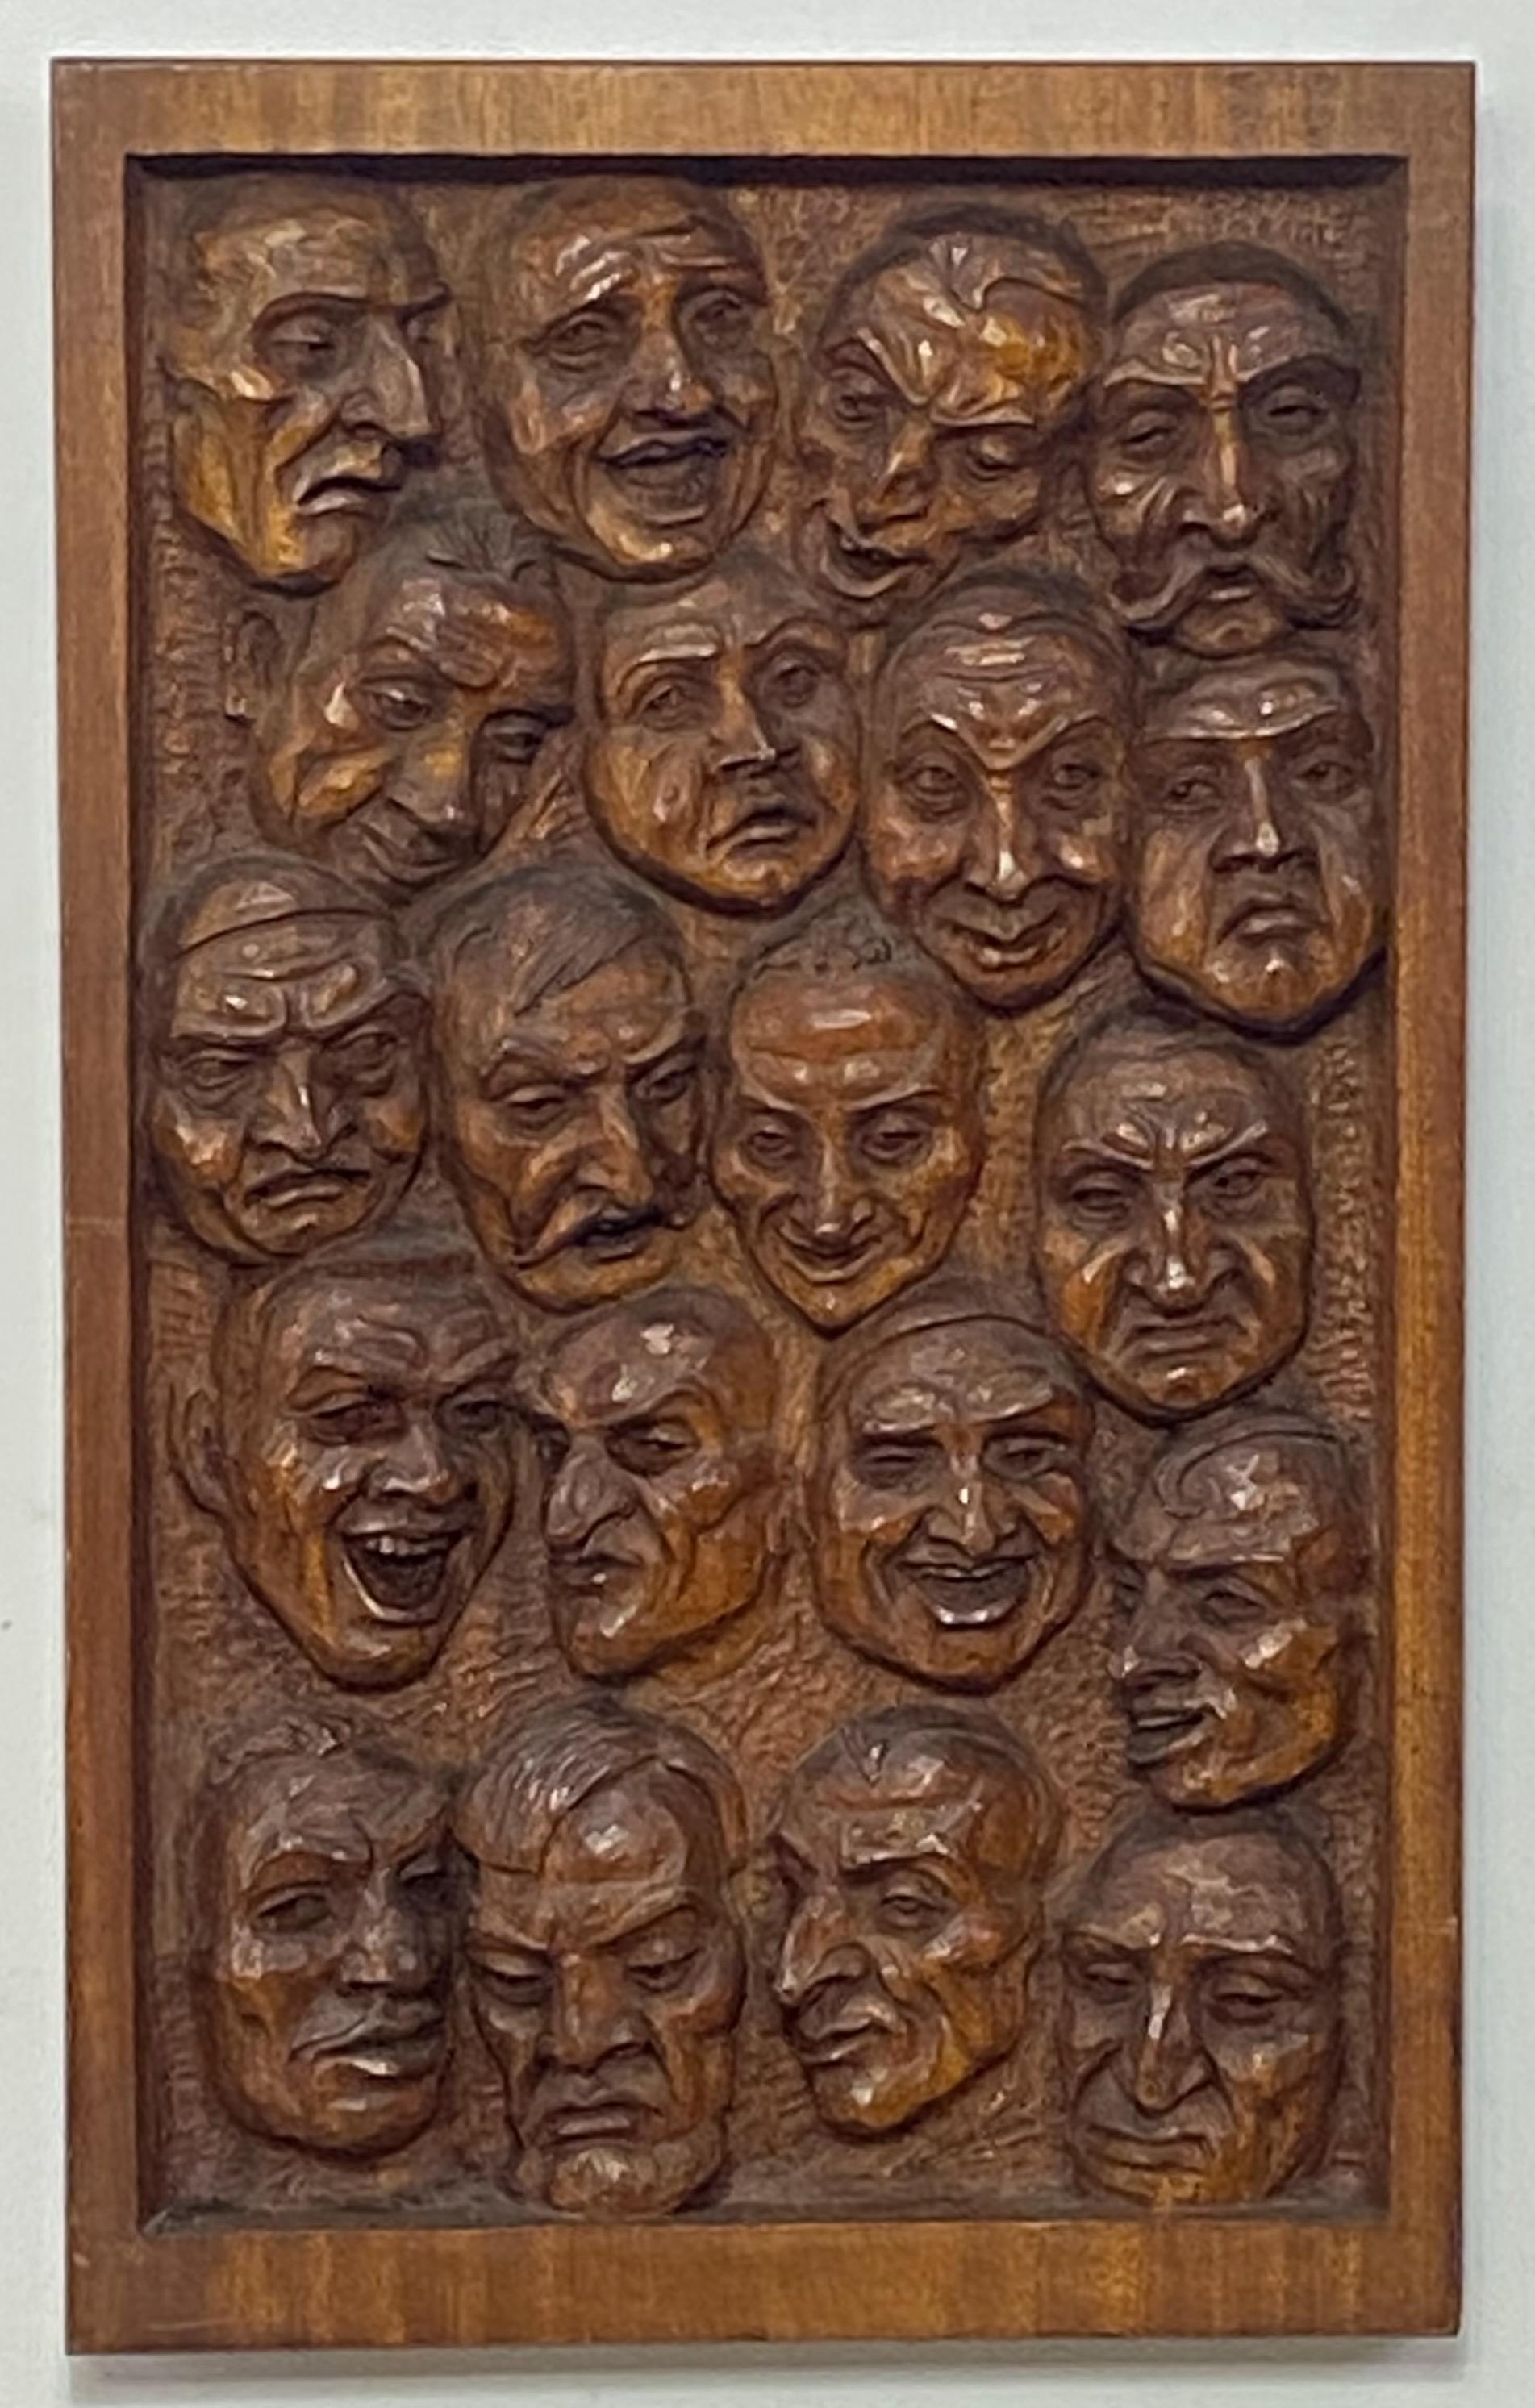 Outsider or Folk Art style relief carved mahogany wall sculpture. Carvings of 20 faces all with different expressions and emotions.
Signed Emil Janel and dated 1934.
Emil Gottfred Janel (1897 - 1981) was active/lived in California / Sweden. Emil